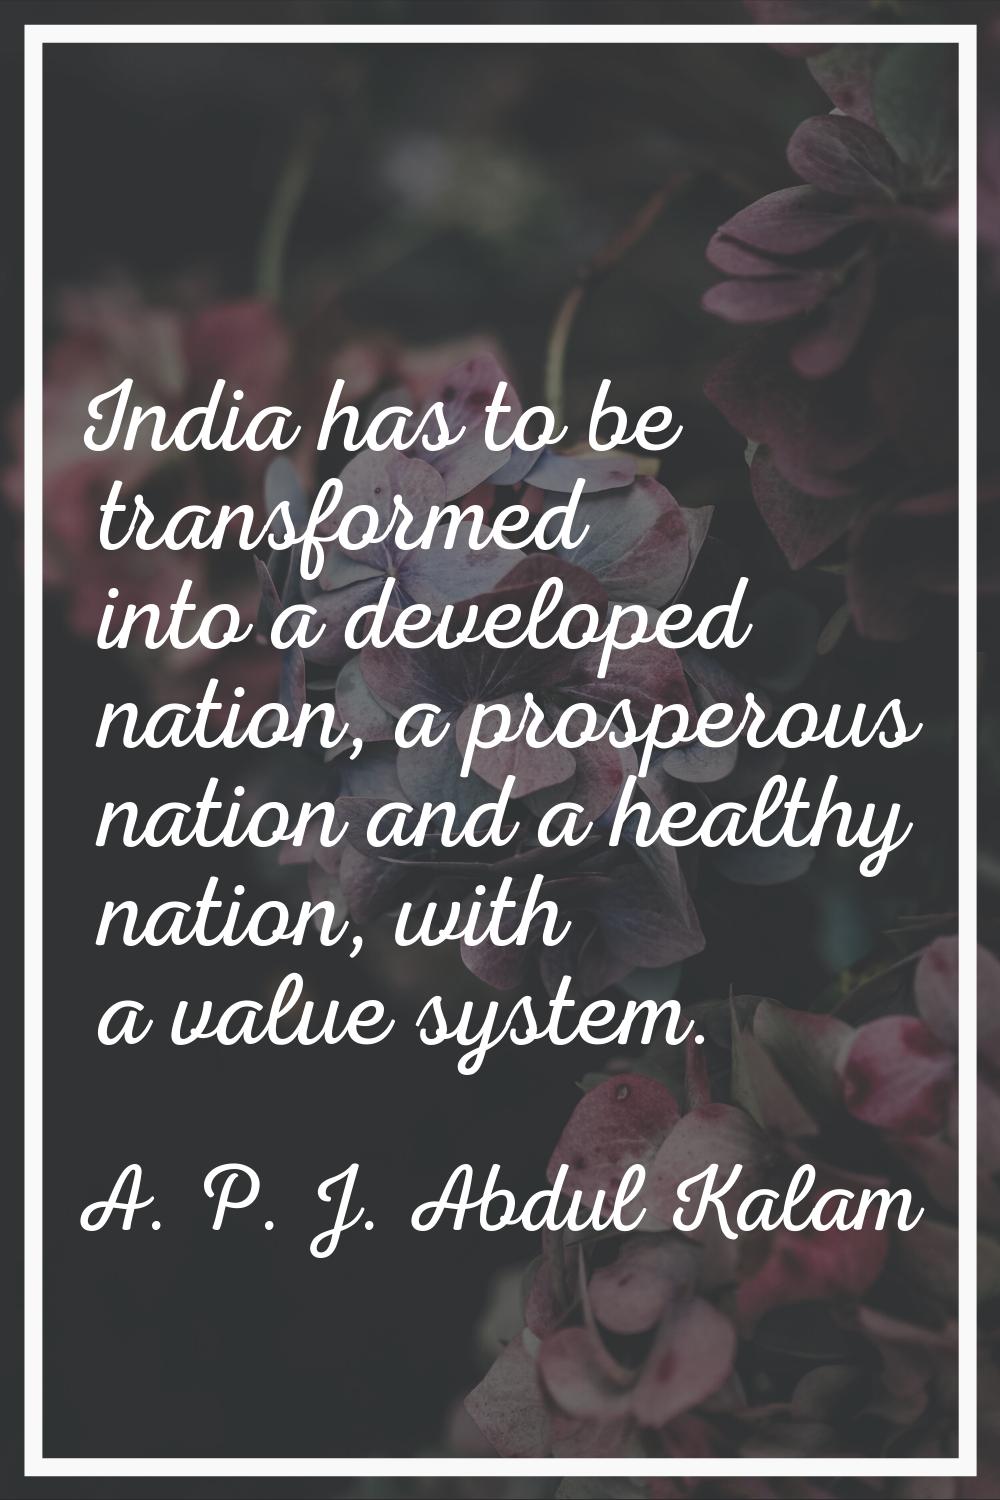 India has to be transformed into a developed nation, a prosperous nation and a healthy nation, with